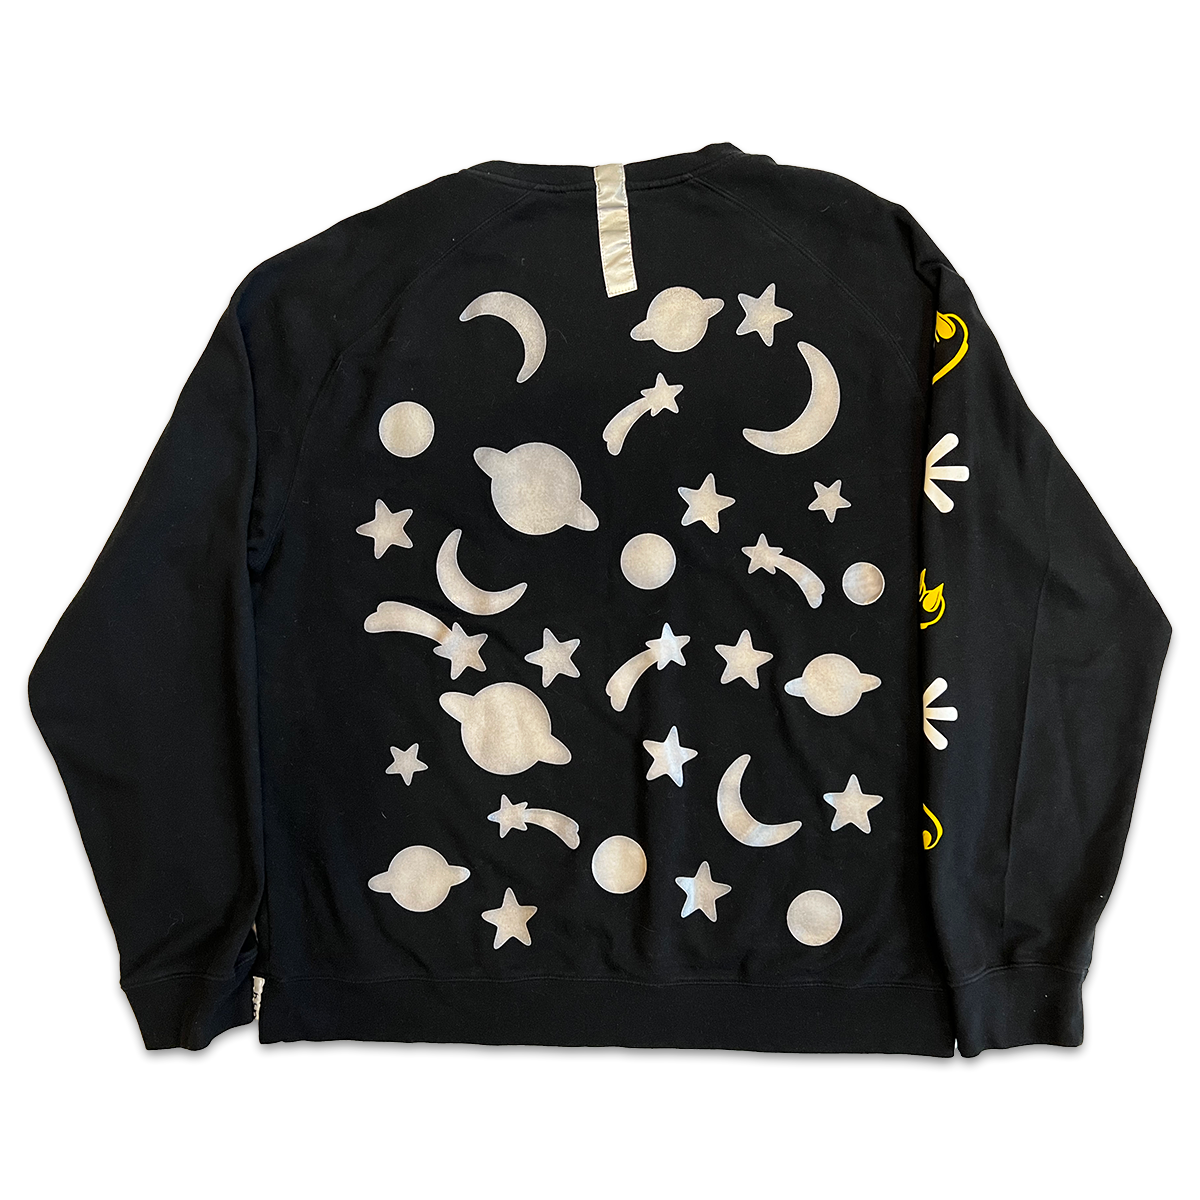 GLOW IN THE DARK SPACED OUT CLAW CREWNECK